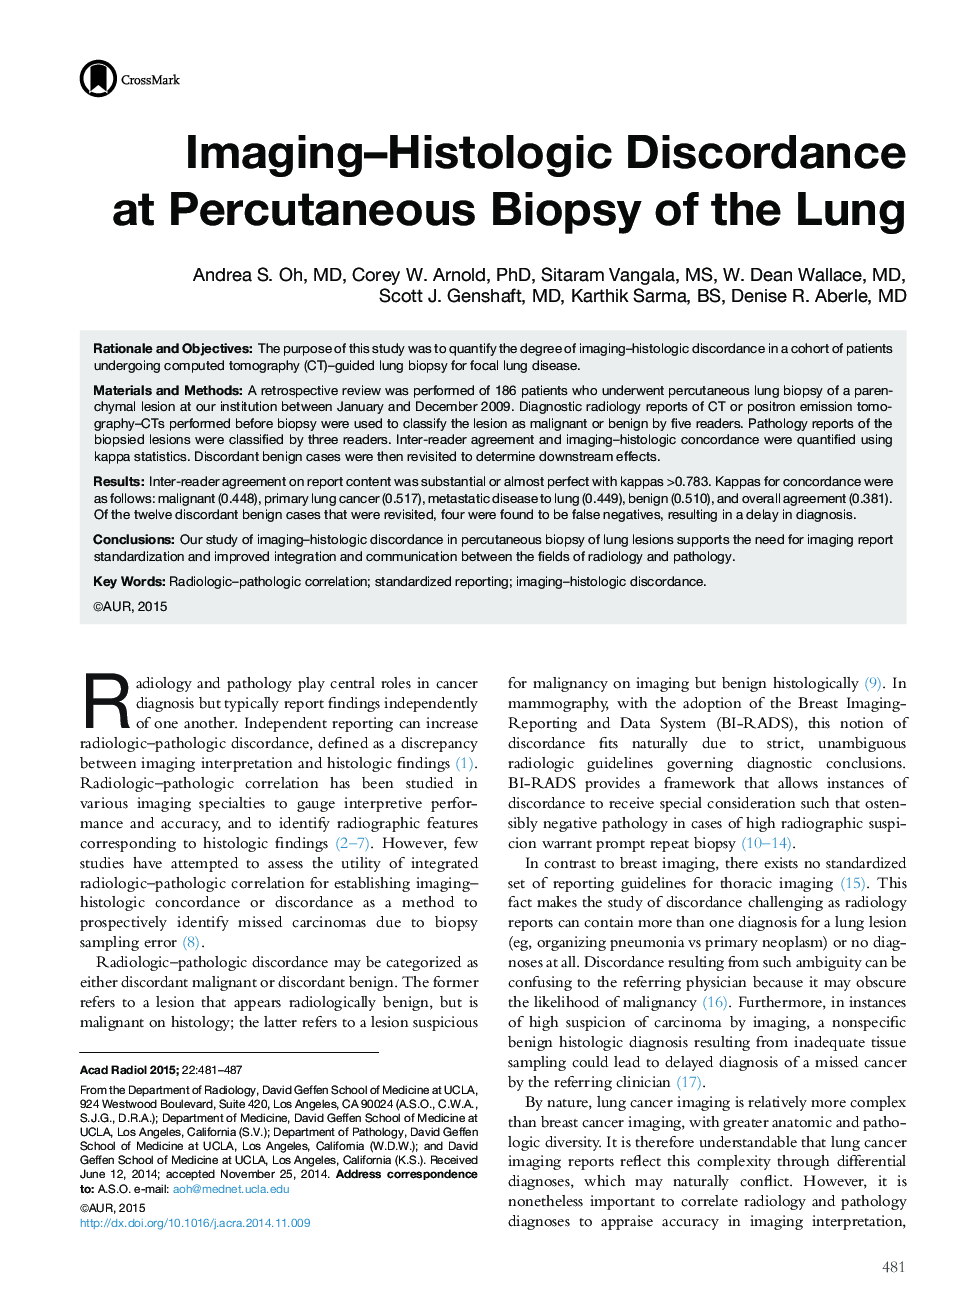 Imaging-Histologic Discordance at Percutaneous Biopsy of the Lung